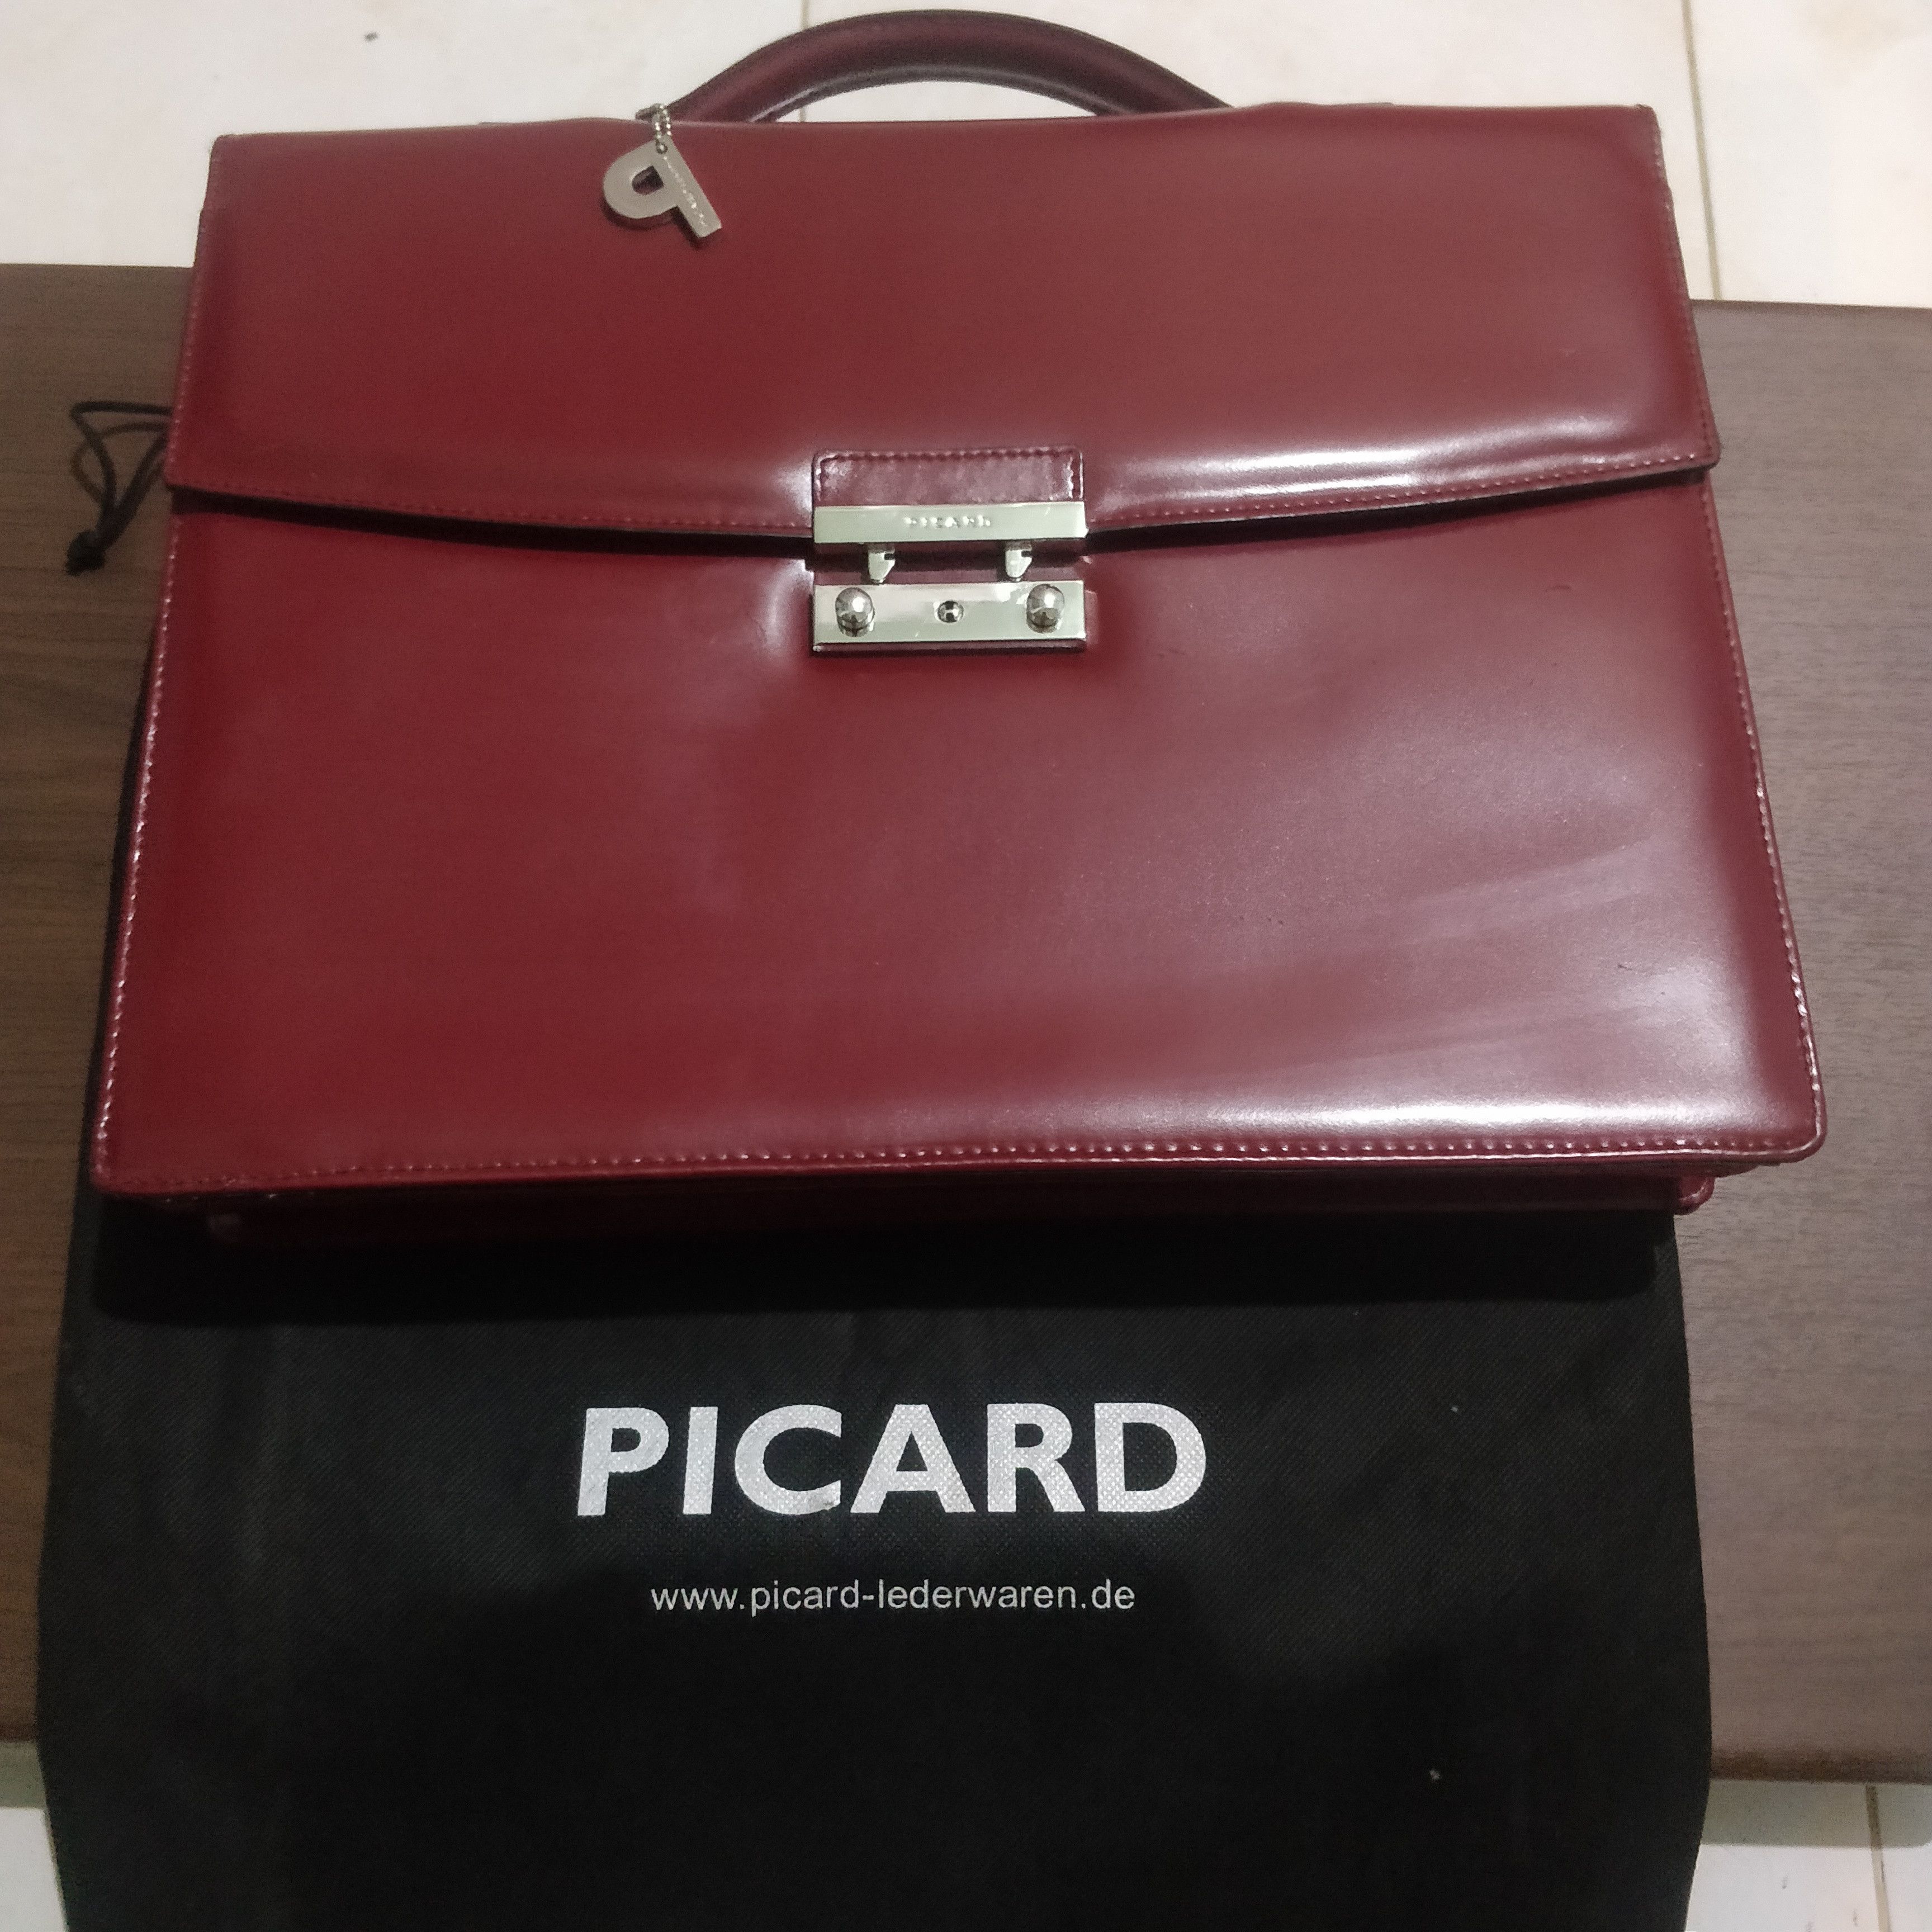 Picard, Picard leather bags